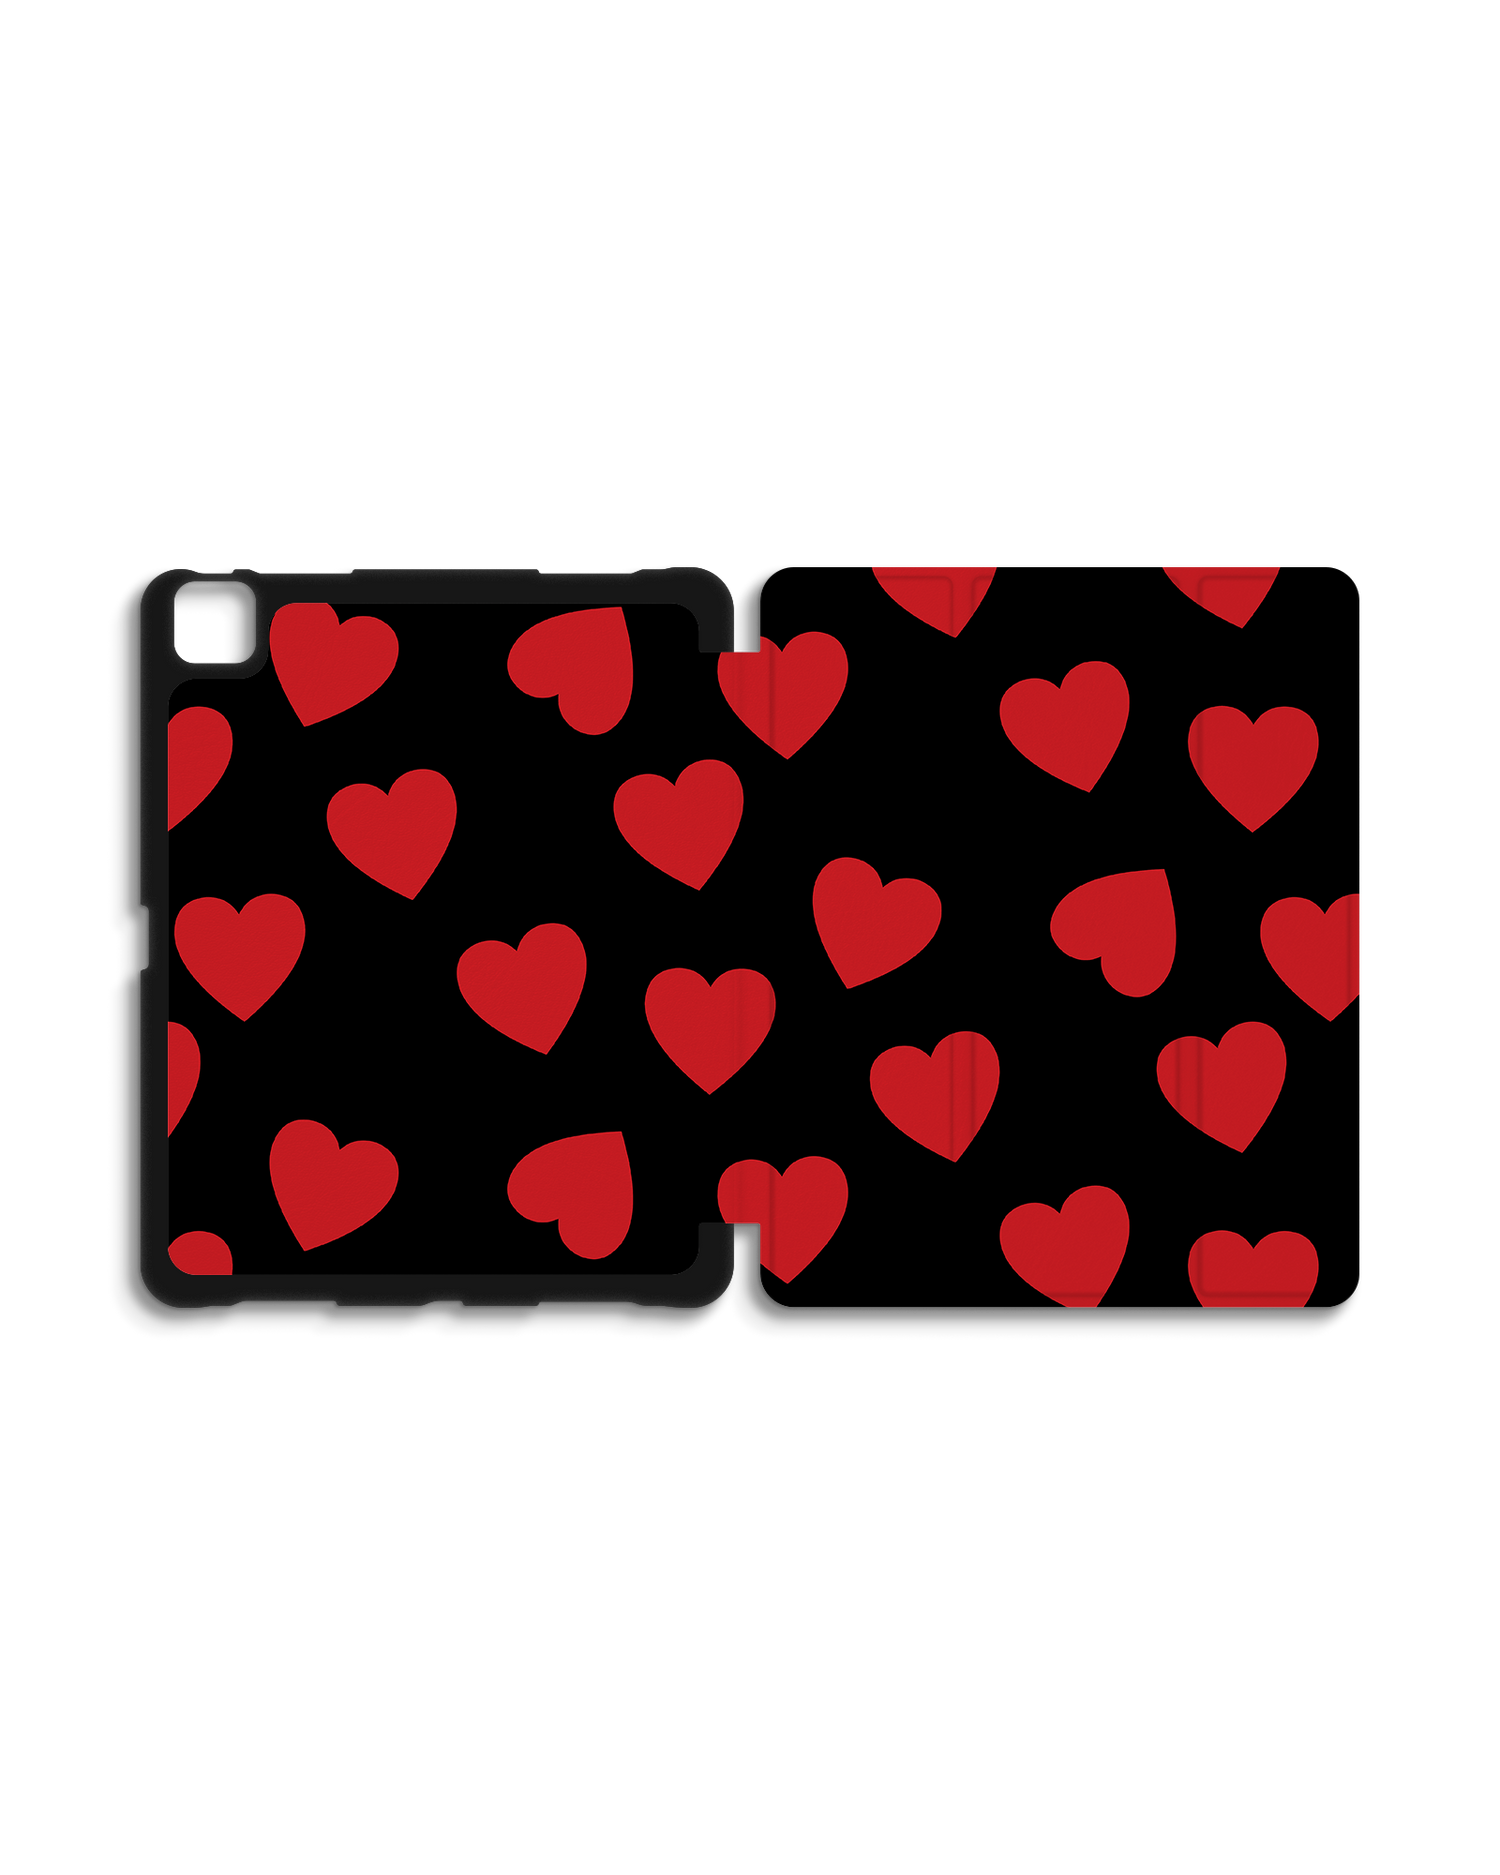 Repeating Hearts iPad Case with Pencil Holder for Apple iPad Pro 6 12.9